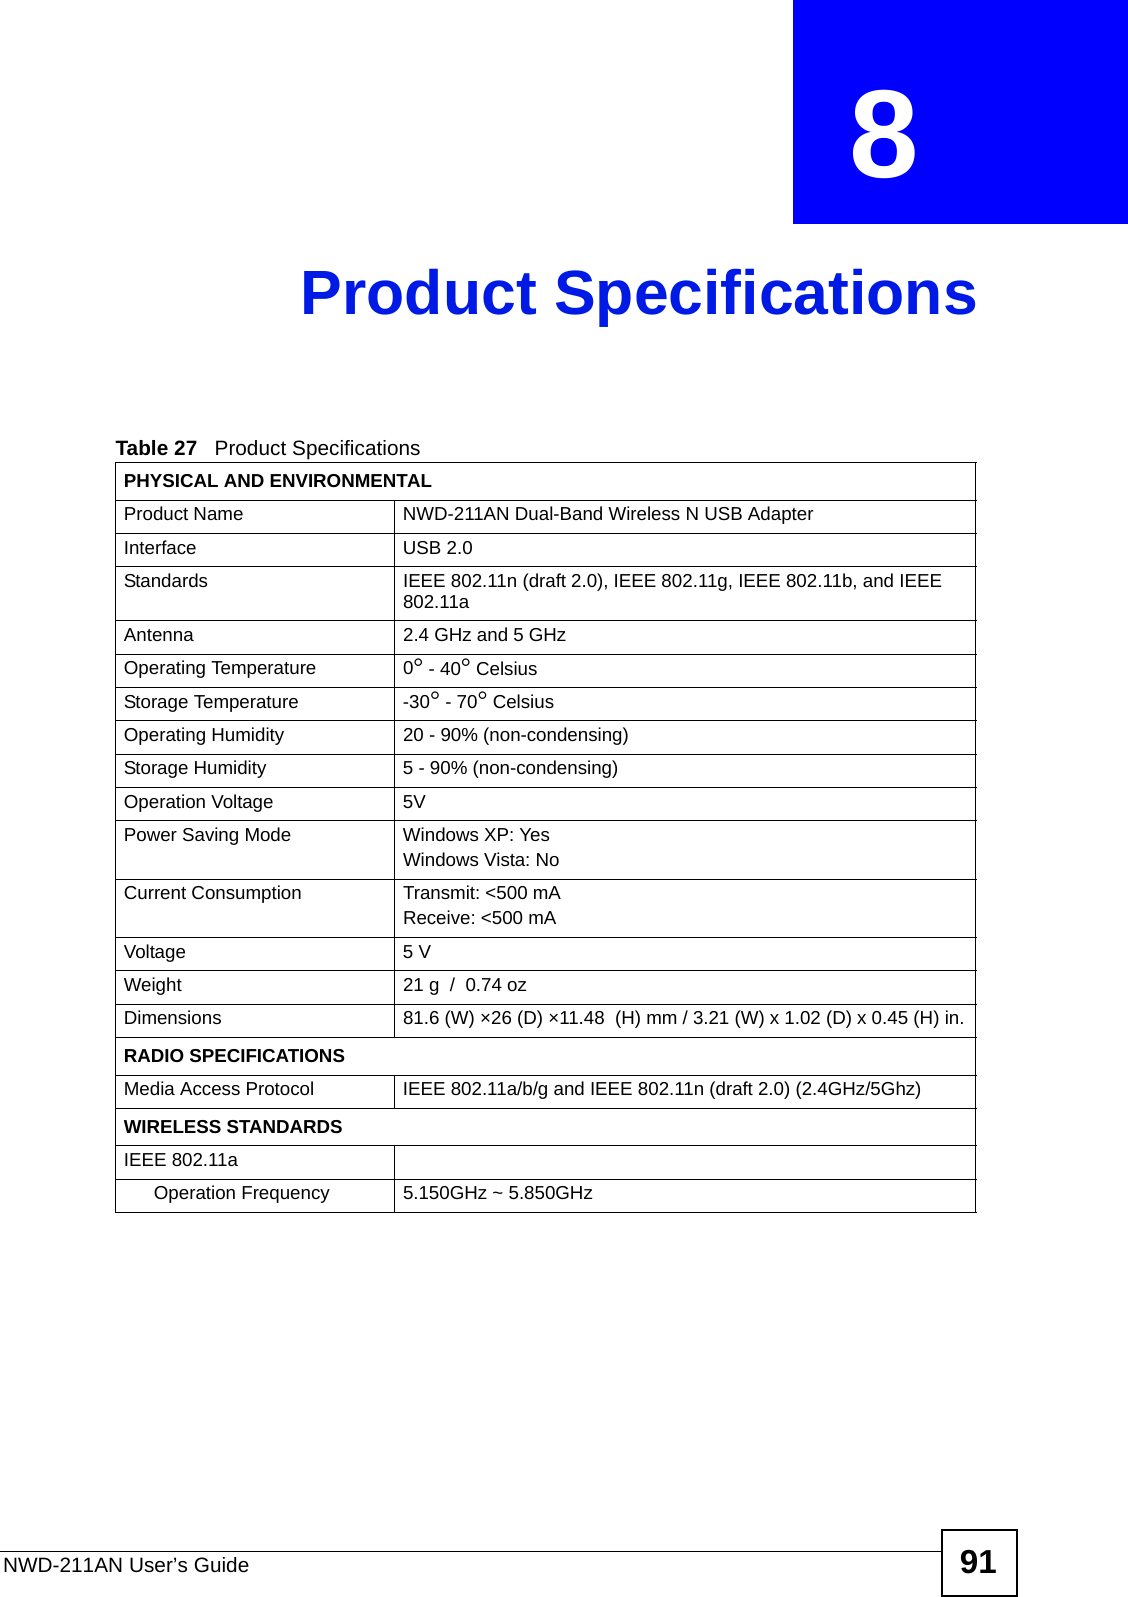 NWD-211AN User’s Guide 91CHAPTER  8 Product SpecificationsTable 27   Product Specifications PHYSICAL AND ENVIRONMENTALProduct Name  NWD-211AN Dual-Band Wireless N USB AdapterInterface USB 2.0Standards IEEE 802.11n (draft 2.0), IEEE 802.11g, IEEE 802.11b, and IEEE 802.11aAntenna 2.4 GHz and 5 GHz Operating Temperature 0° - 40° CelsiusStorage Temperature -30° - 70° CelsiusOperating Humidity 20 - 90% (non-condensing)Storage Humidity  5 - 90% (non-condensing)Operation Voltage 5VPower Saving Mode Windows XP: YesWindows Vista: NoCurrent Consumption Transmit: &lt;500 mAReceive: &lt;500 mAVoltage 5 VWeight 21 g  /  0.74 ozDimensions 81.6 (W) ×26 (D) ×11.48  (H) mm / 3.21 (W) x 1.02 (D) x 0.45 (H) in.RADIO SPECIFICATIONSMedia Access Protocol IEEE 802.11a/b/g and IEEE 802.11n (draft 2.0) (2.4GHz/5Ghz)WIRELESS STANDARDSIEEE 802.11aOperation Frequency  5.150GHz ~ 5.850GHz 